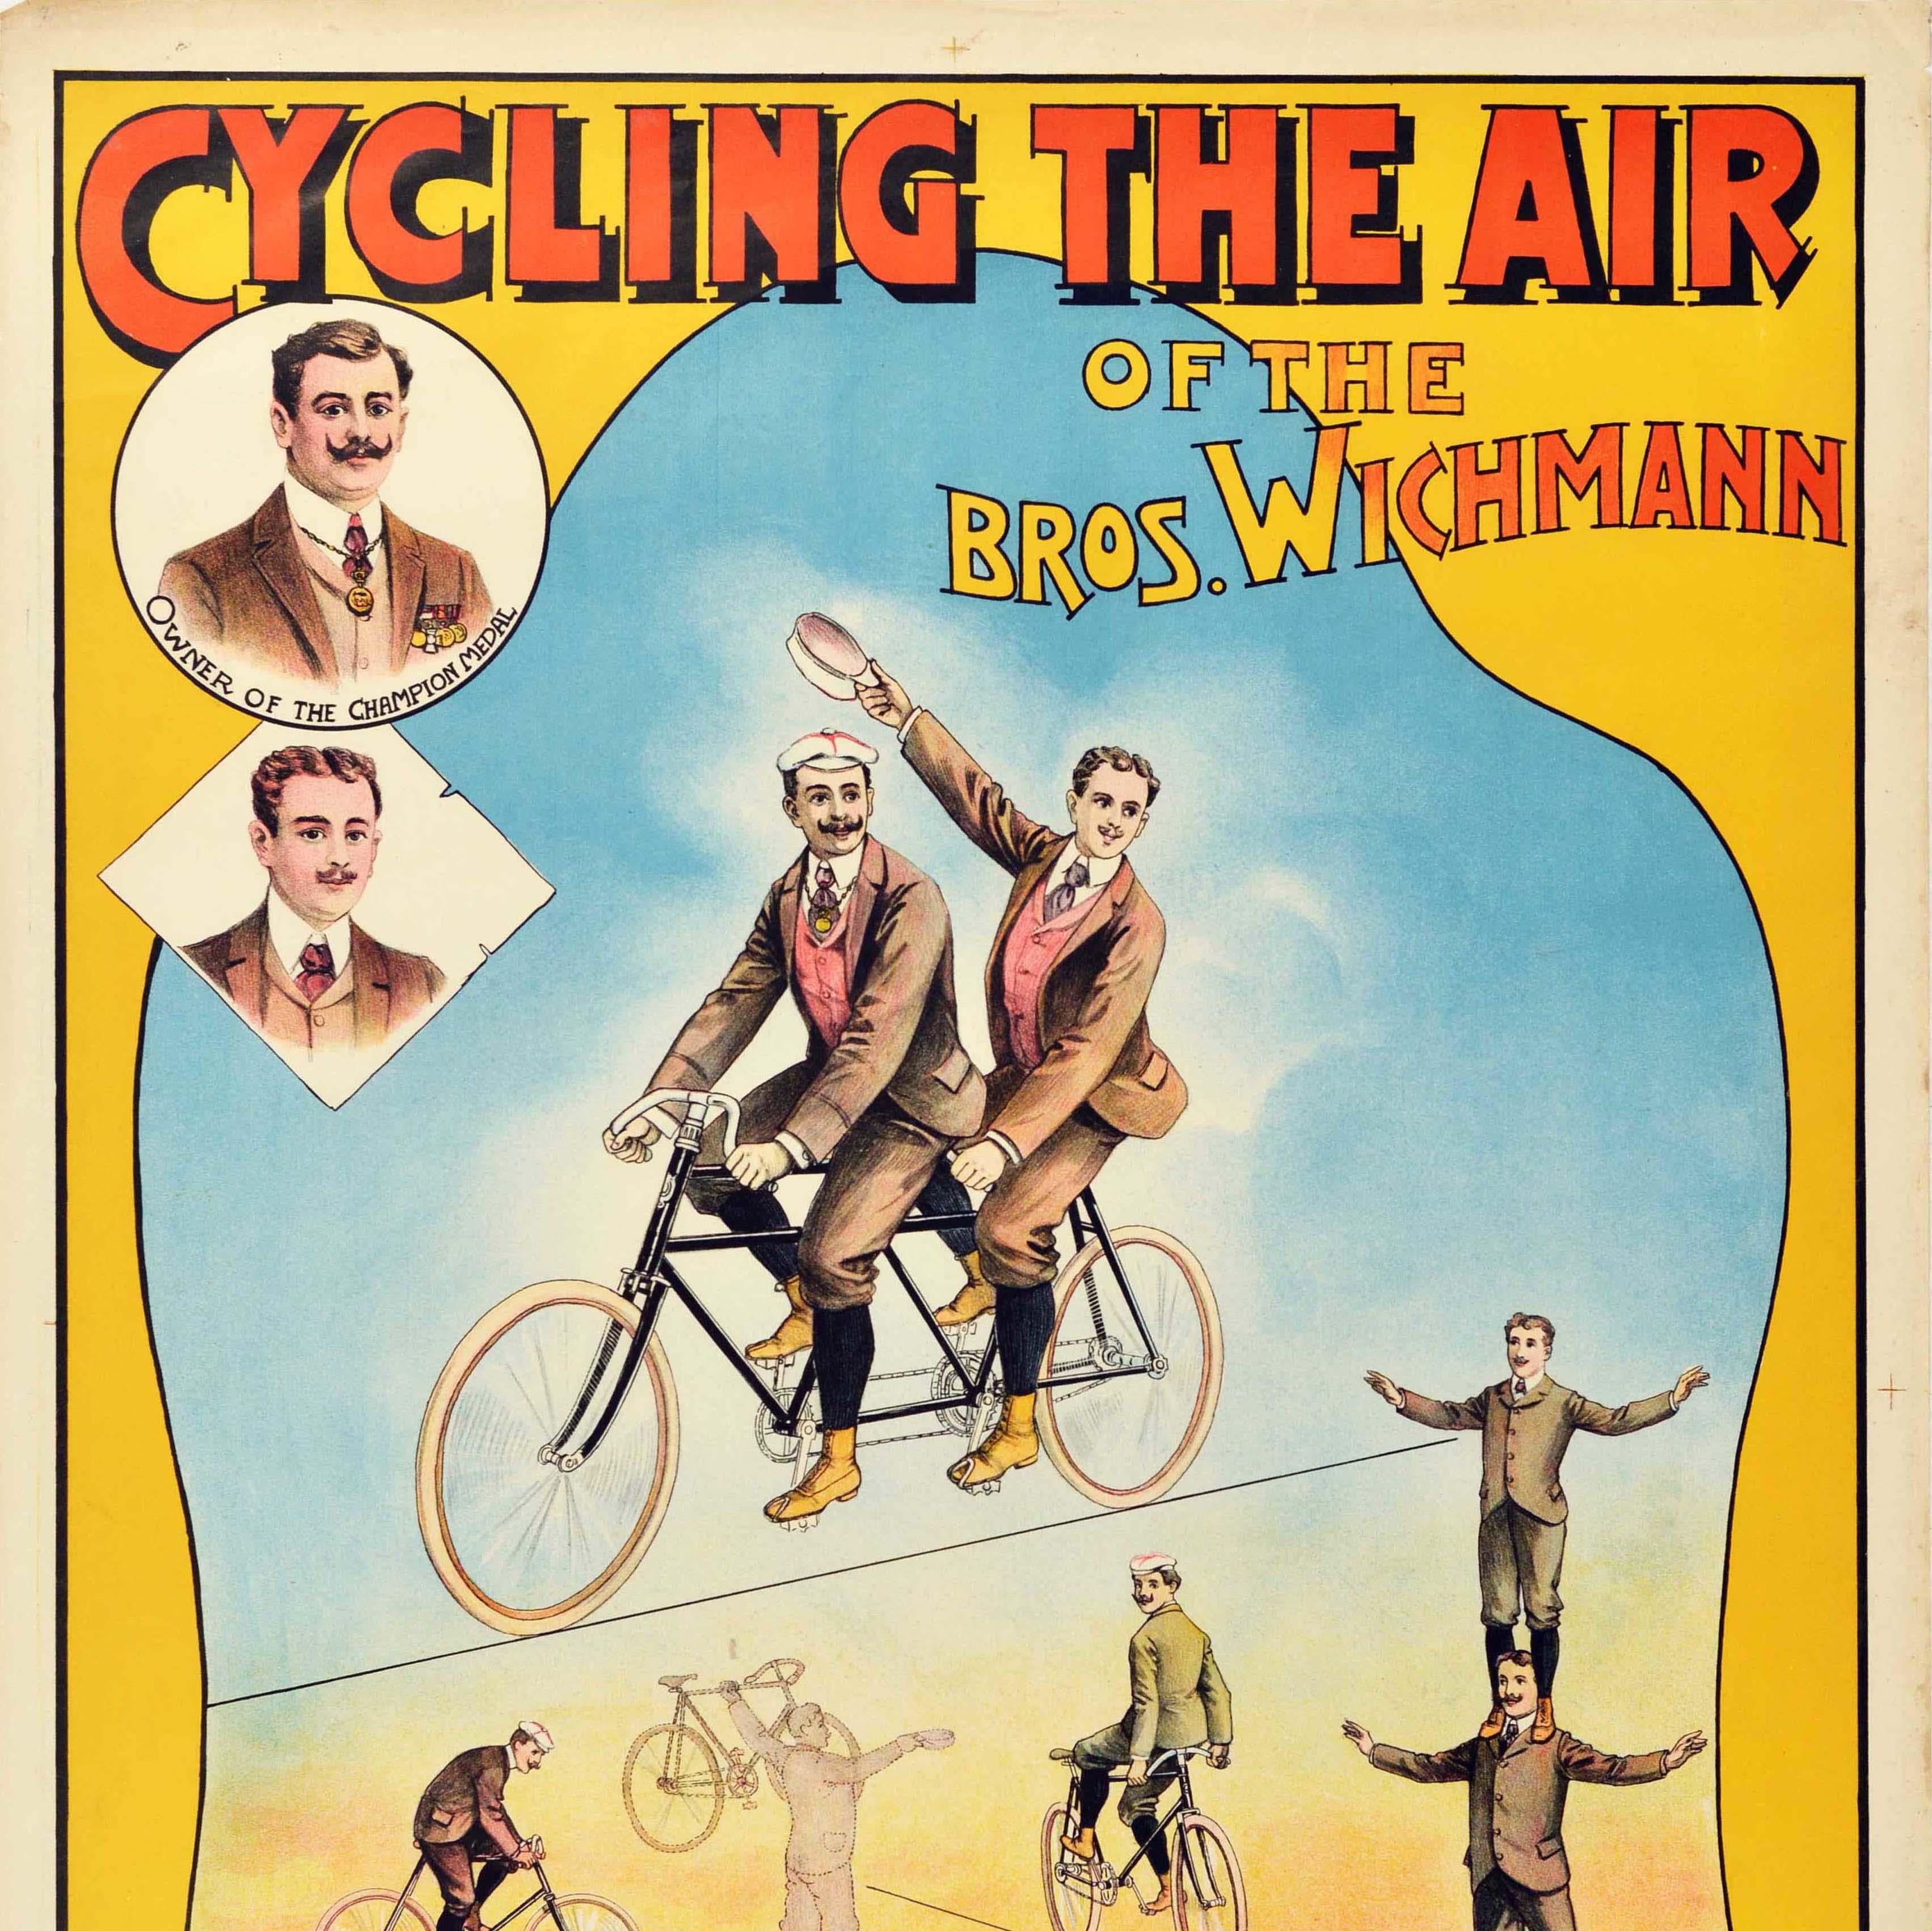 Original Antique Circus Advertising Poster Cycling The Air Bros Wichmann Design - Beige Print by Unknown